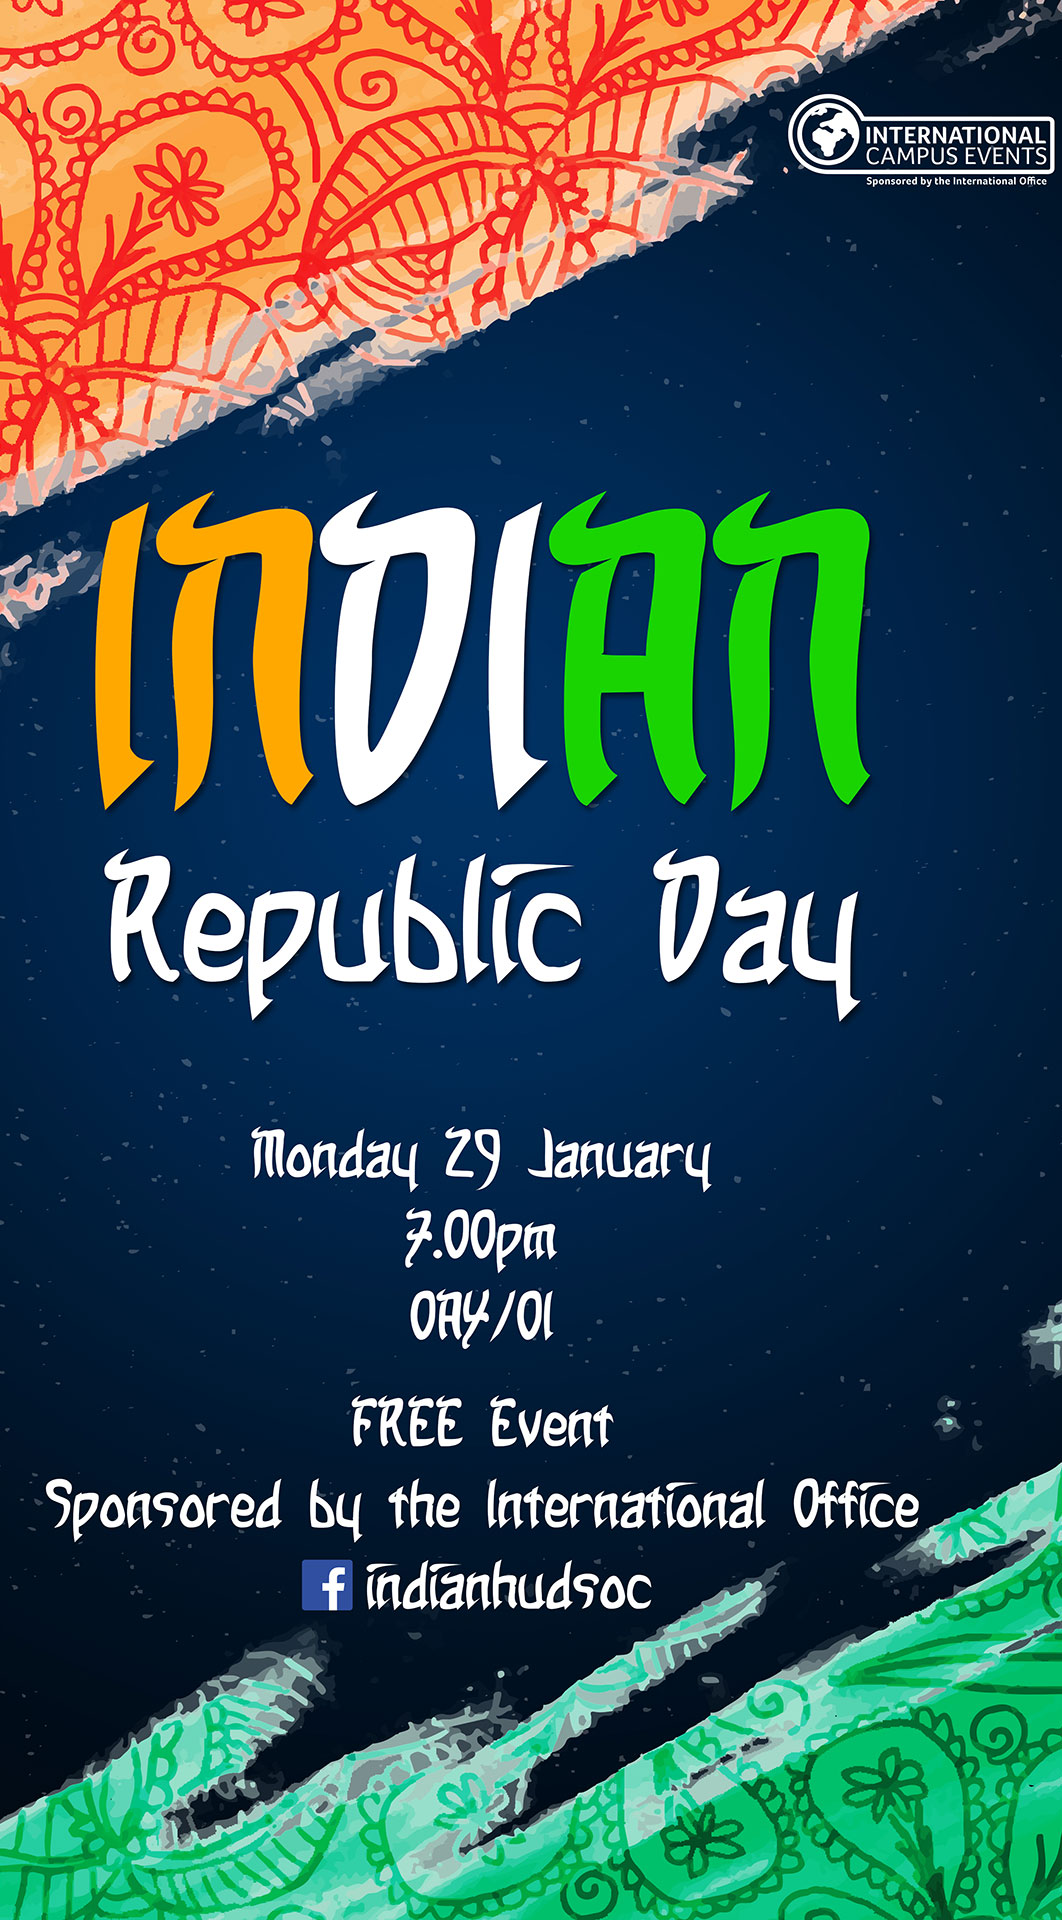 image of portrait poster for india republic day international event